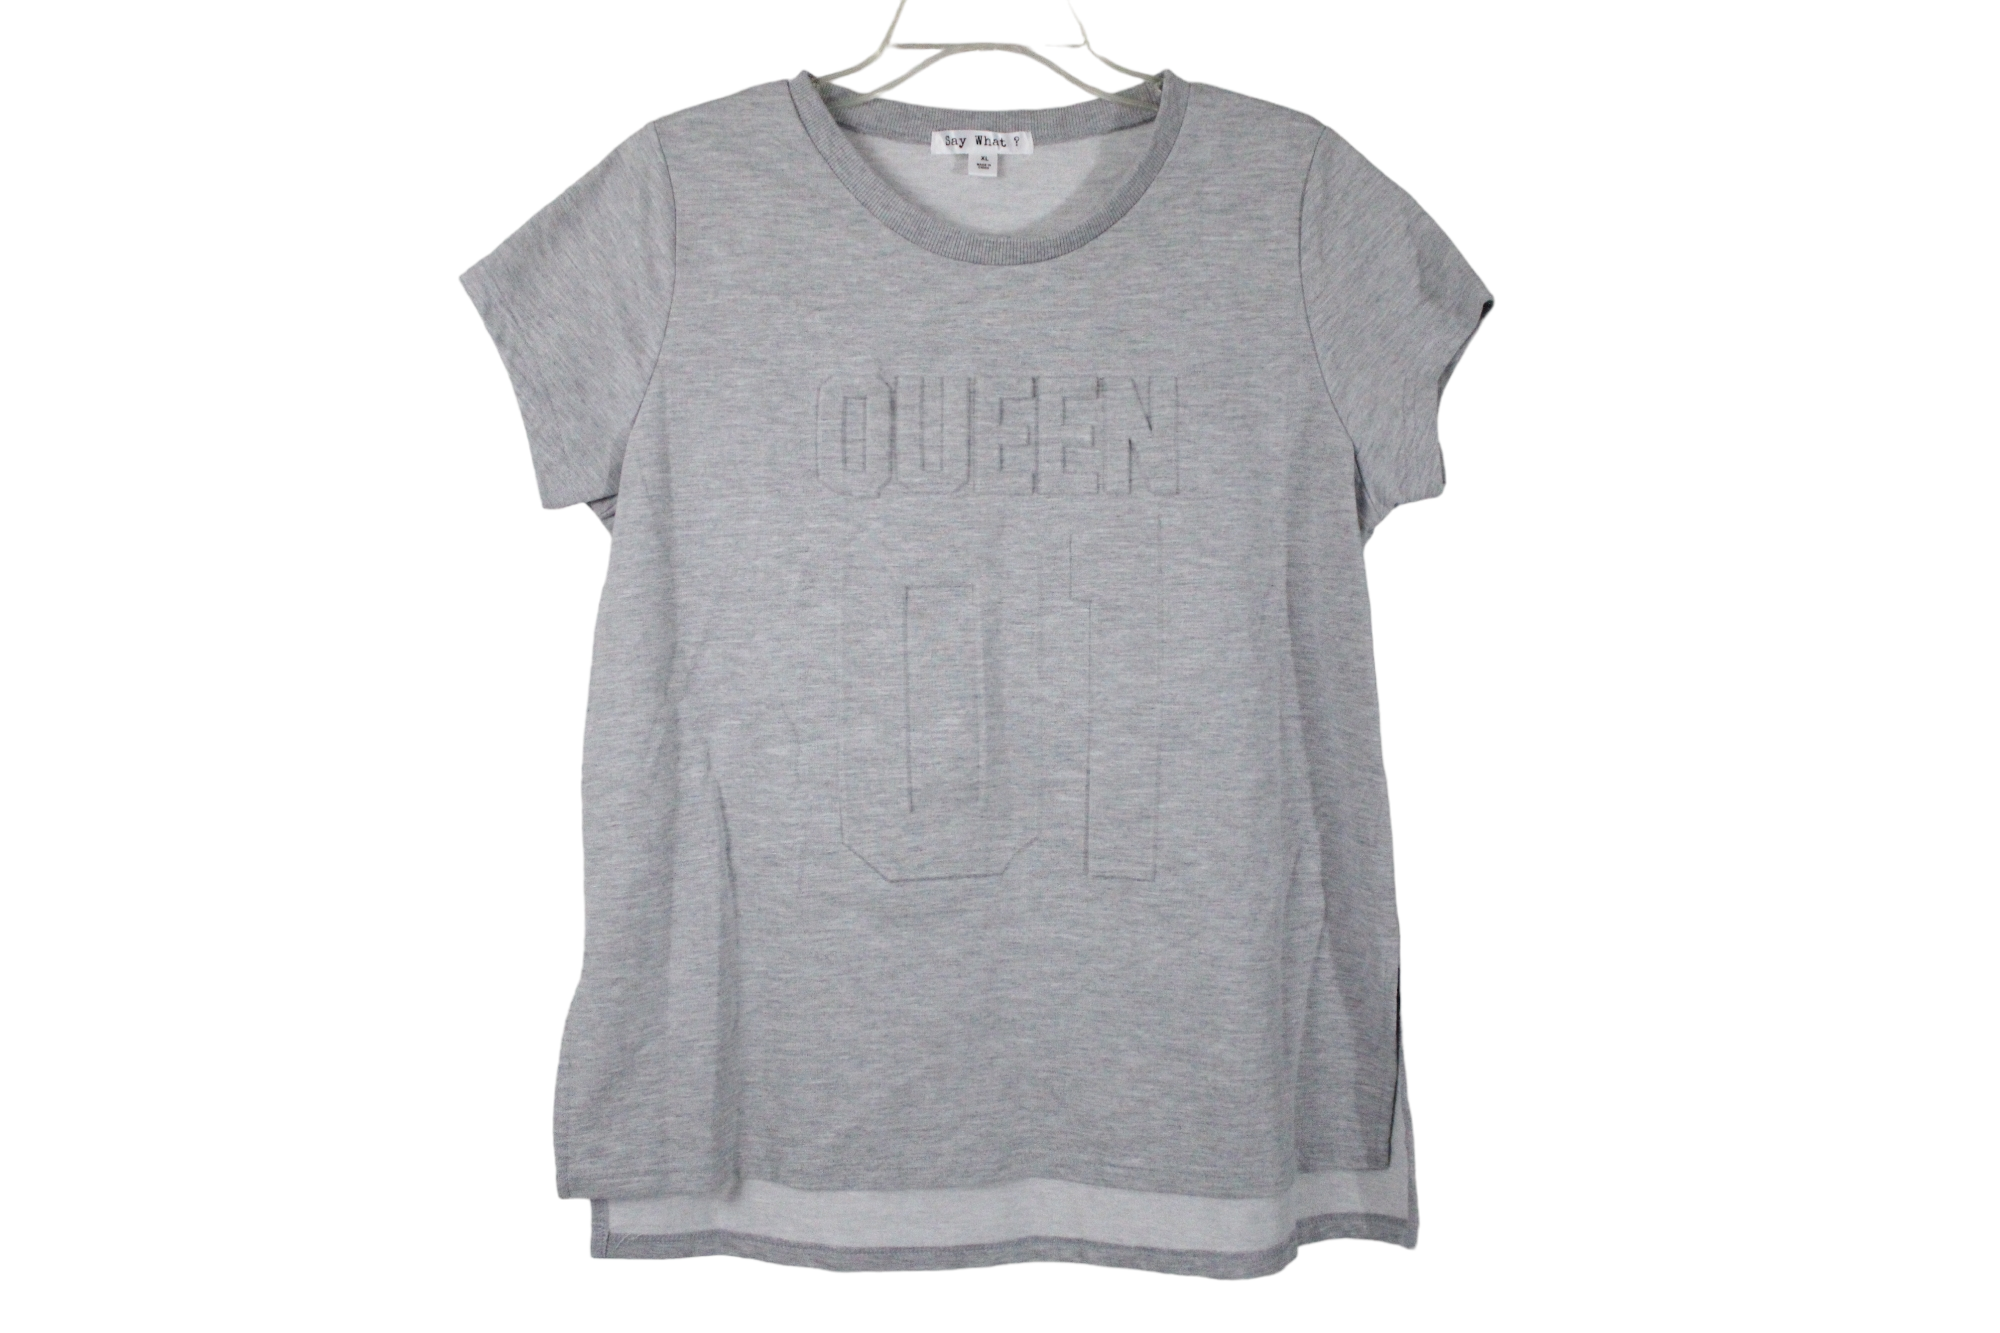 Say What? Queen 01 Gray Top | XL